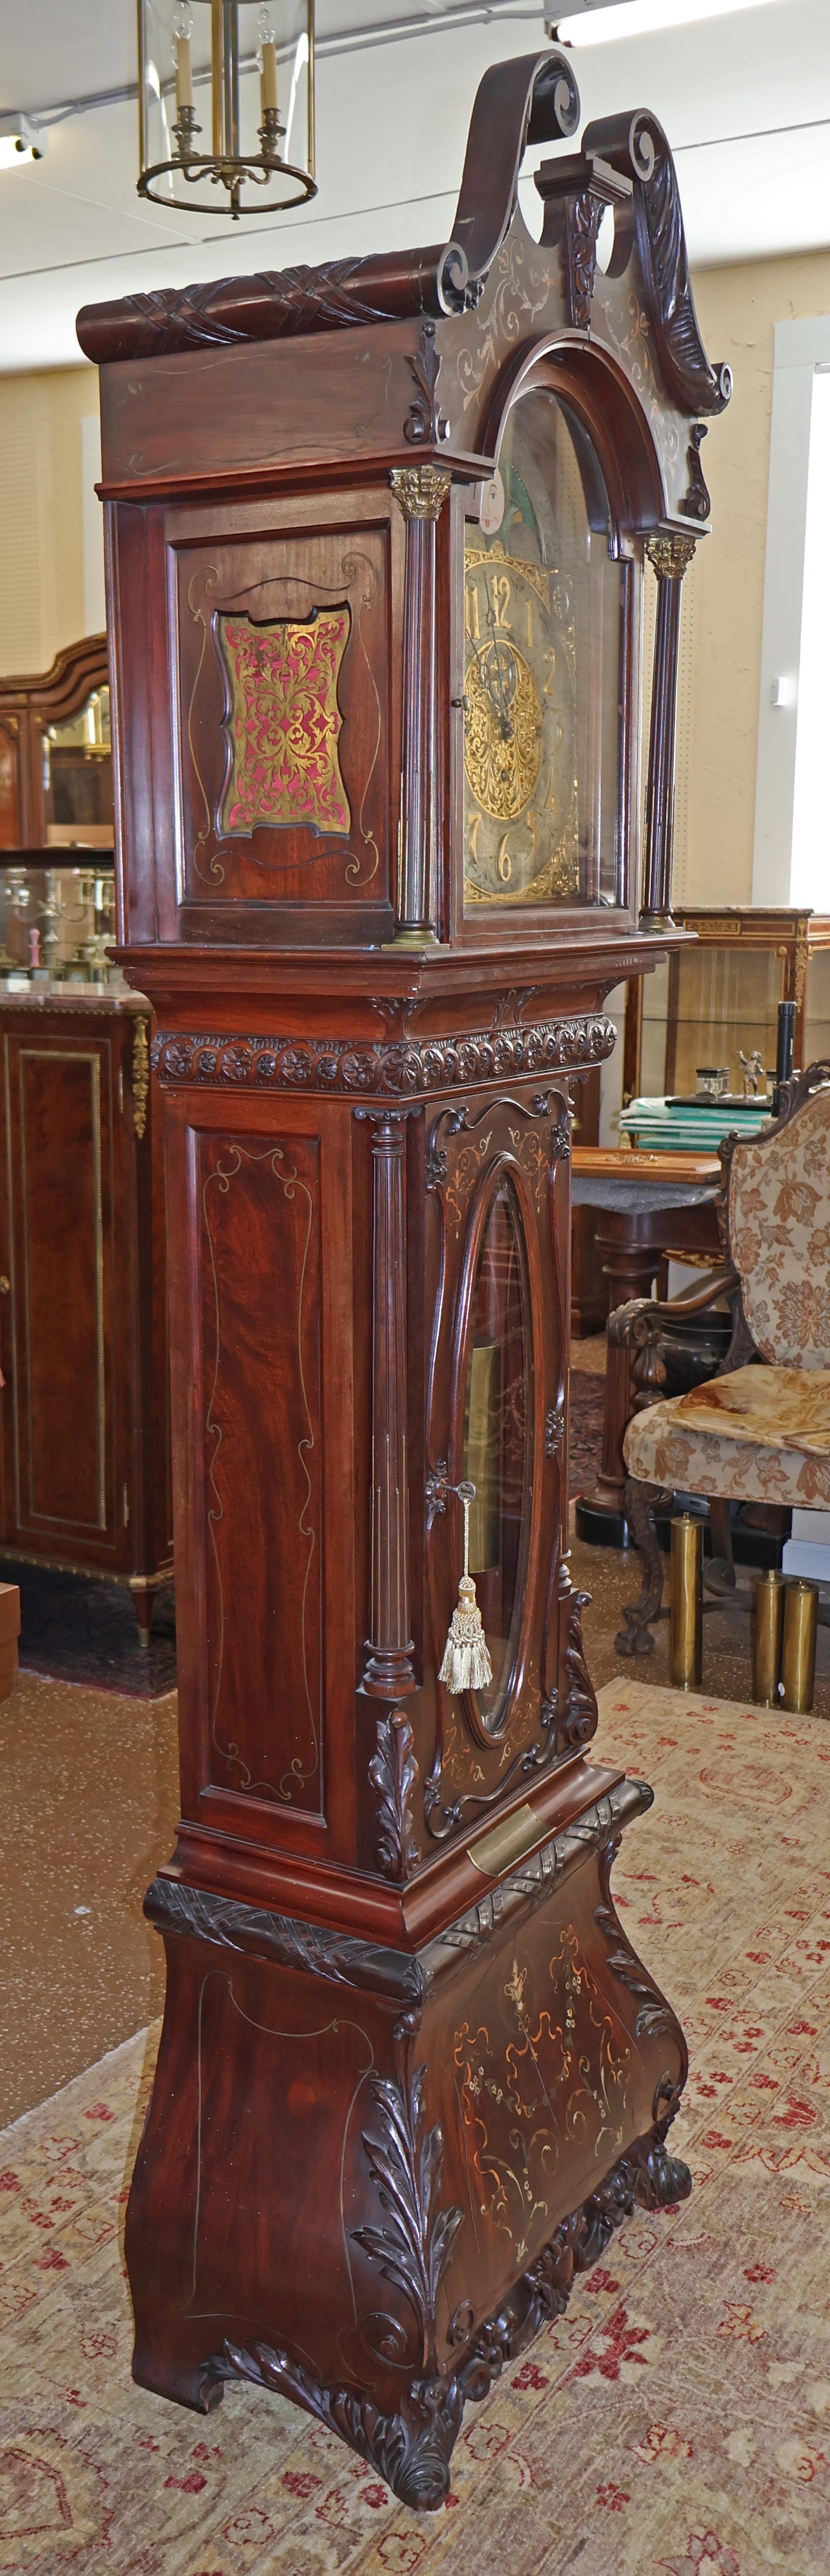 19th Century J.J Elliott Inlaid Brass Mahogany & Mother of Pearl Tall Case Clock In Fair Condition For Sale In Long Branch, NJ